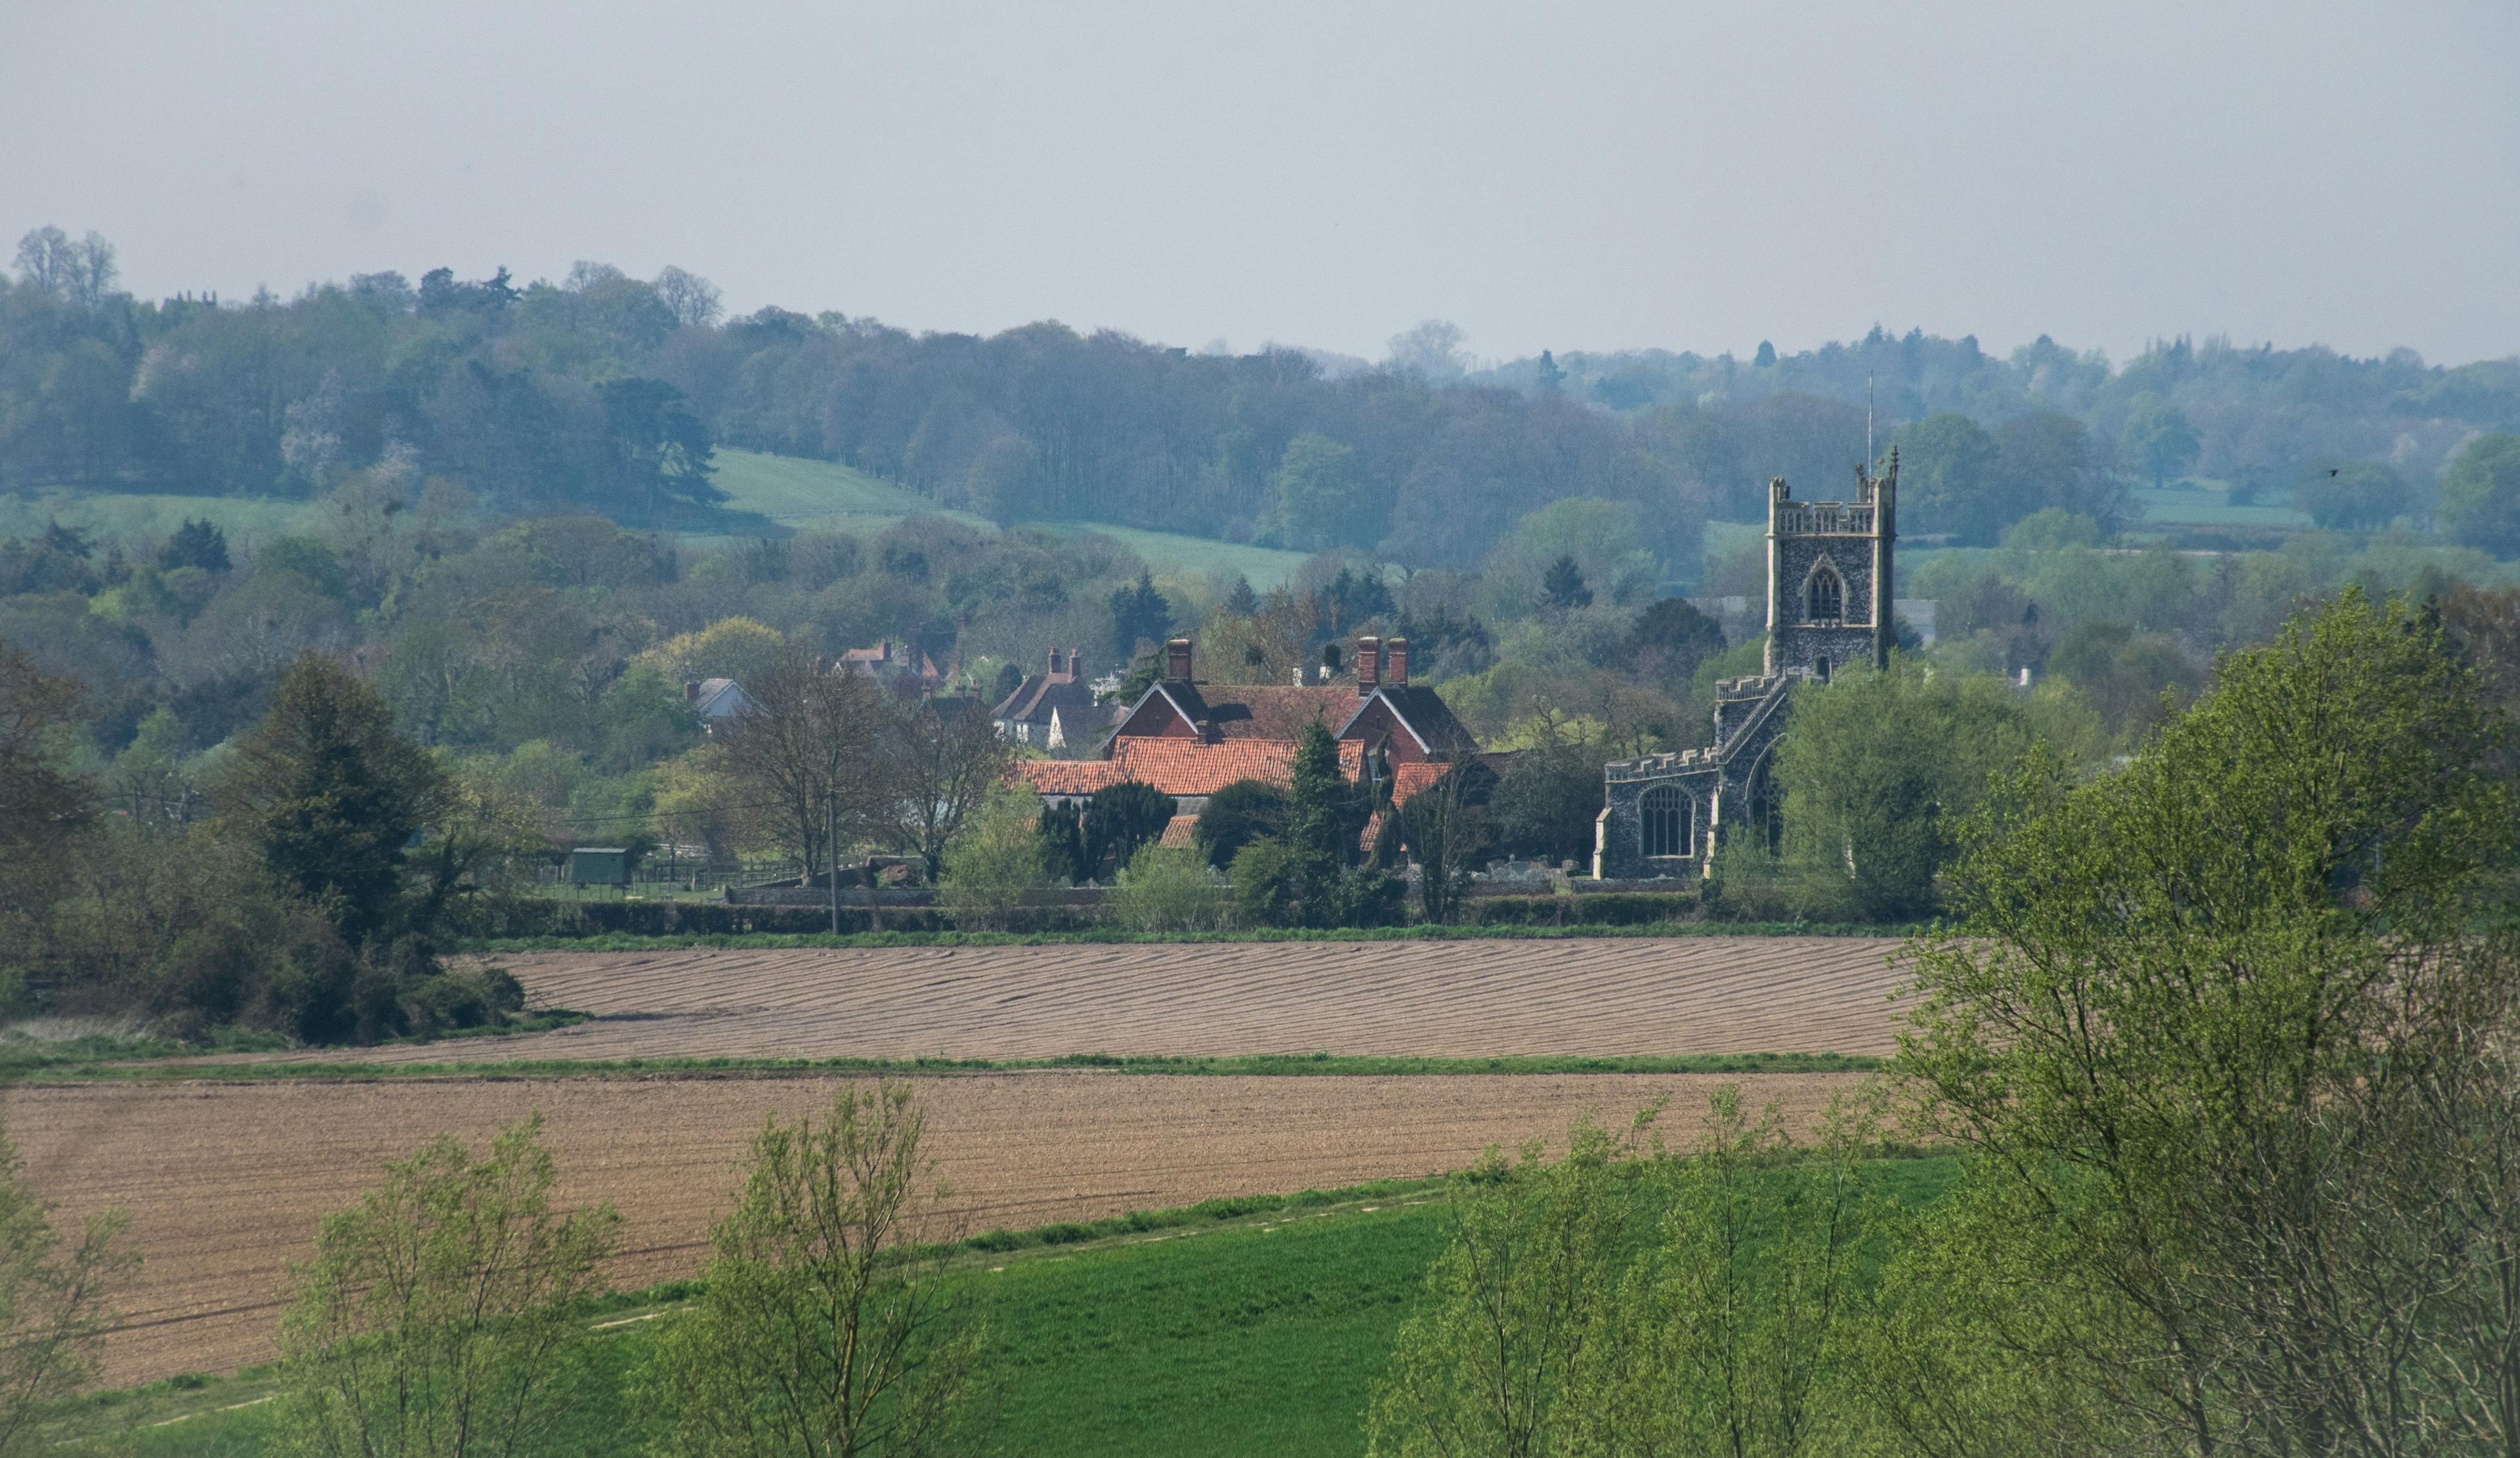 Village in Essex with fields and a church